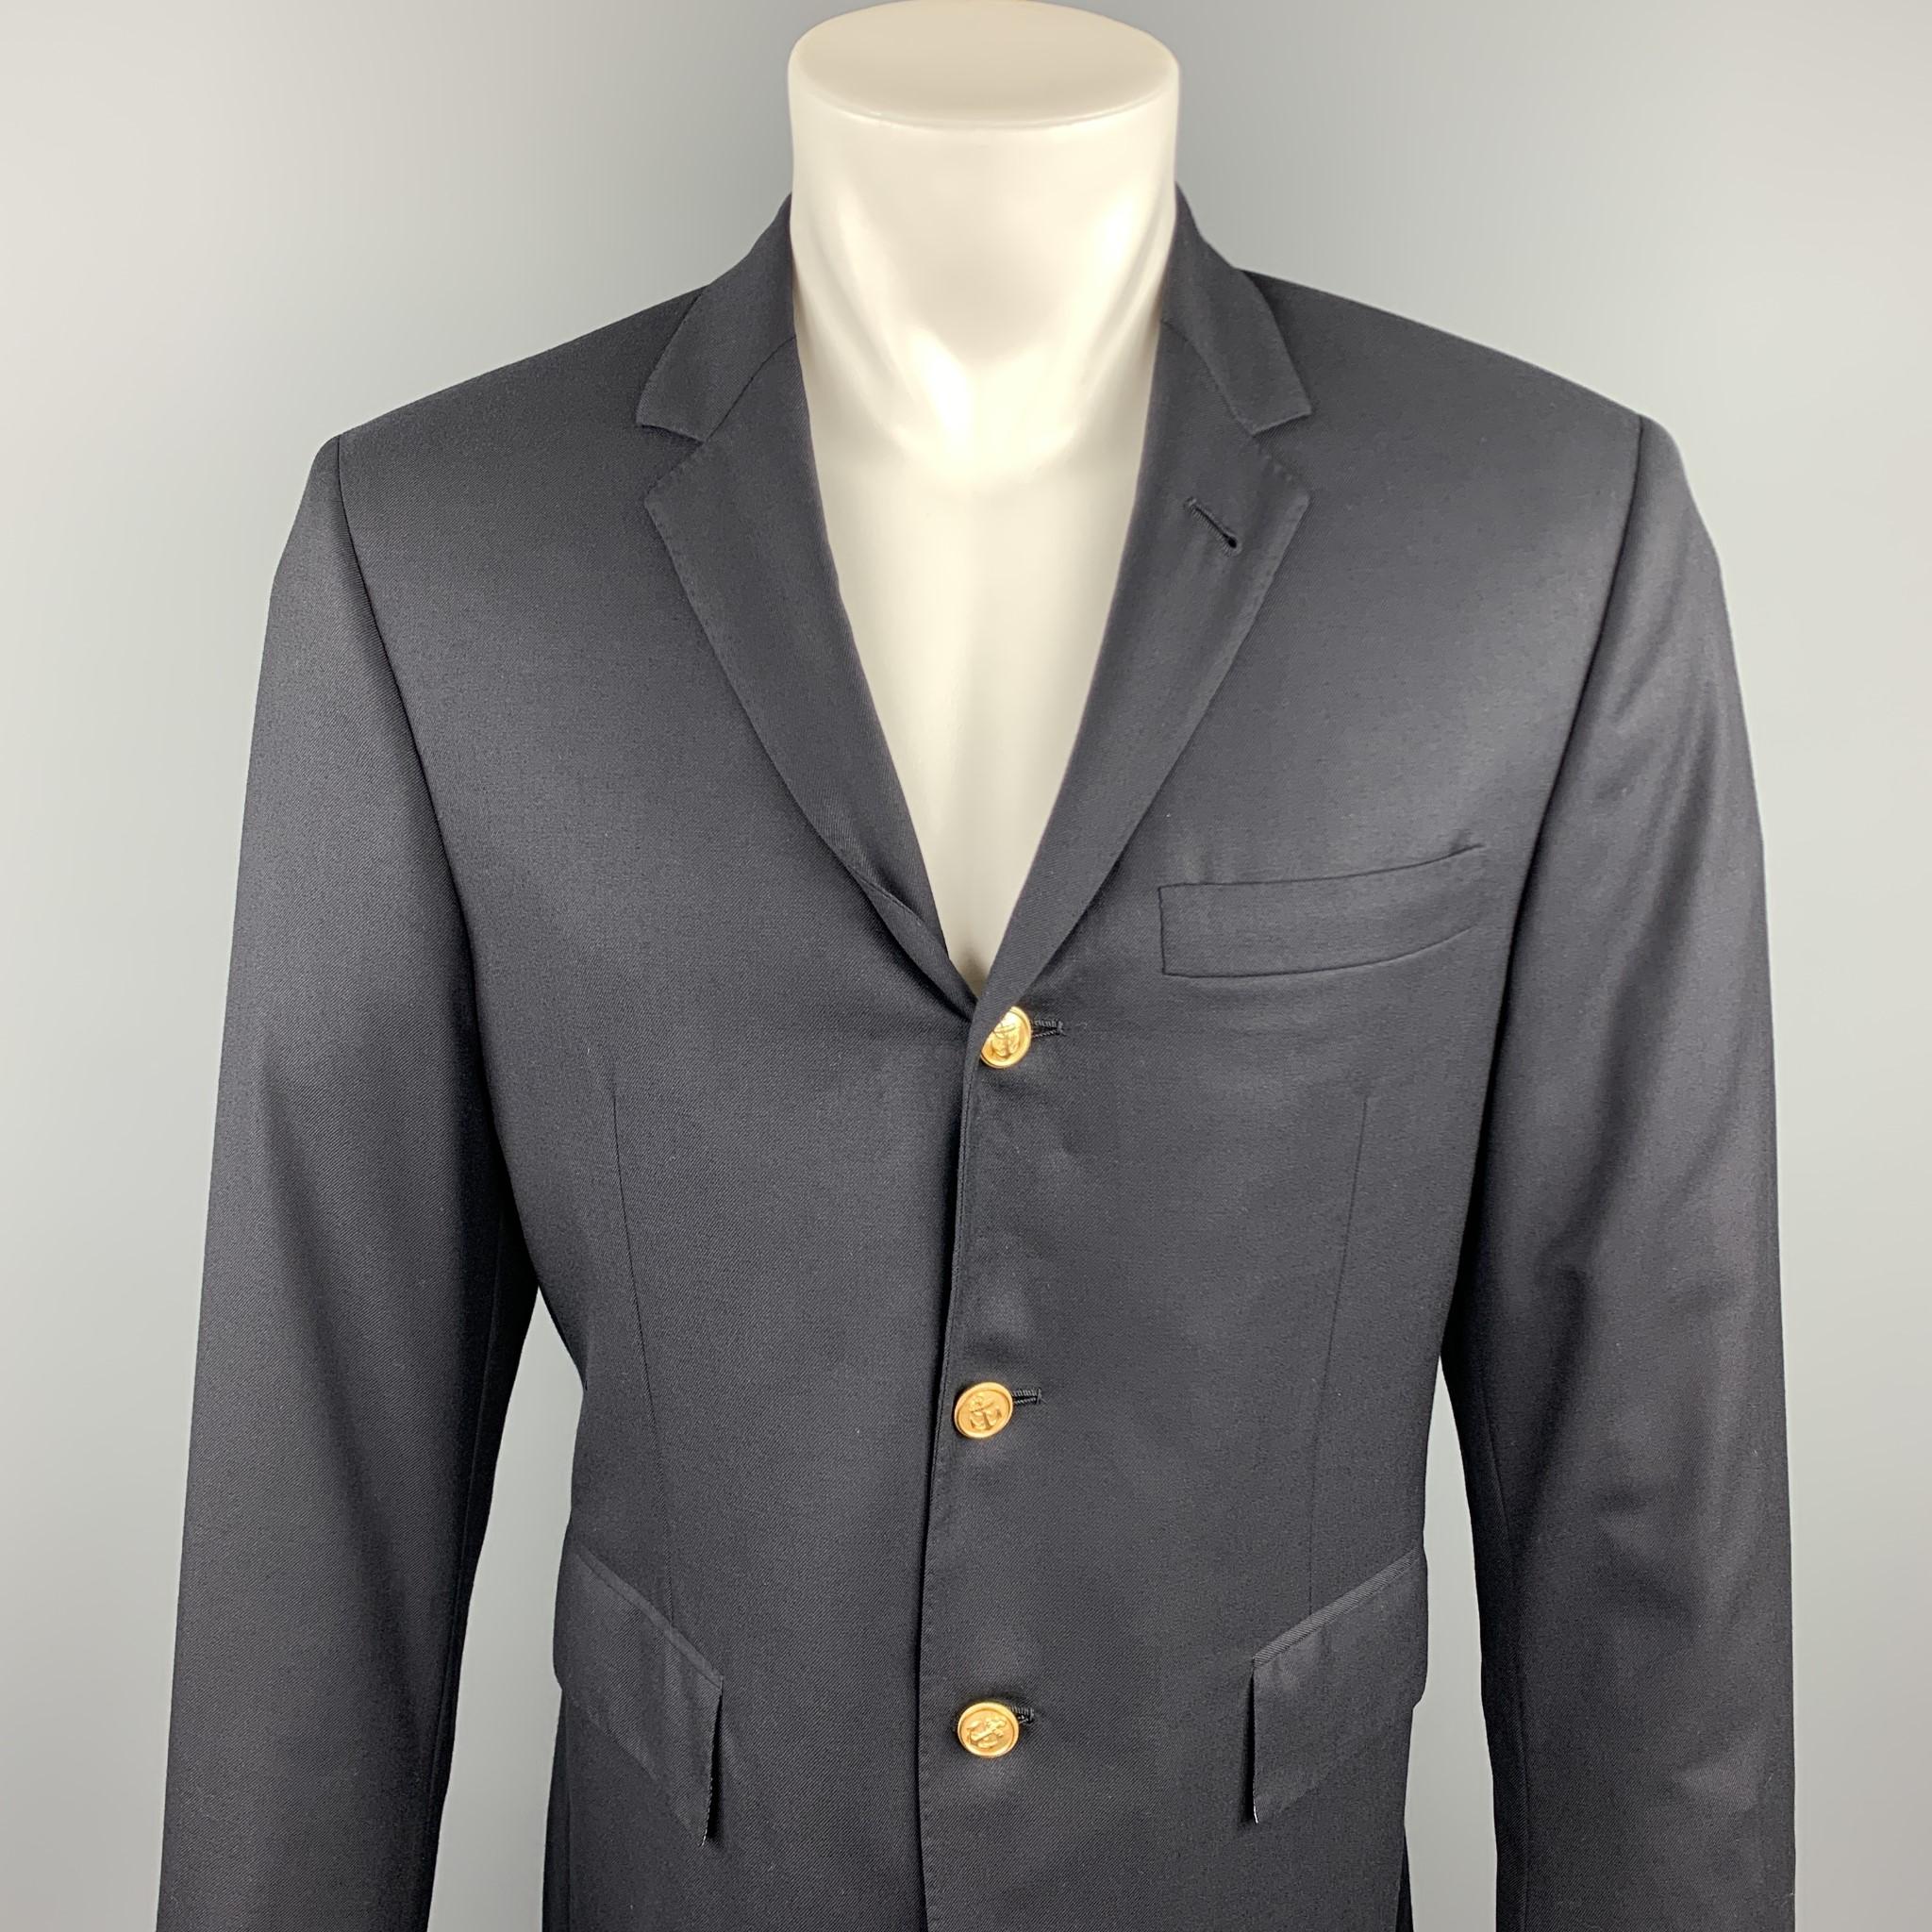 THOM BROWNE sport coat comes in a navy wool featuring a notch lapel style, flap pockets, and a three button closure. Hand made in USA.

Excellent Pre-Owned Condition.
Marked: 40 R

Measurements:

Shoulder: 15.5 in. 
Chest: 38 in.
Sleeve: 25.5 in.